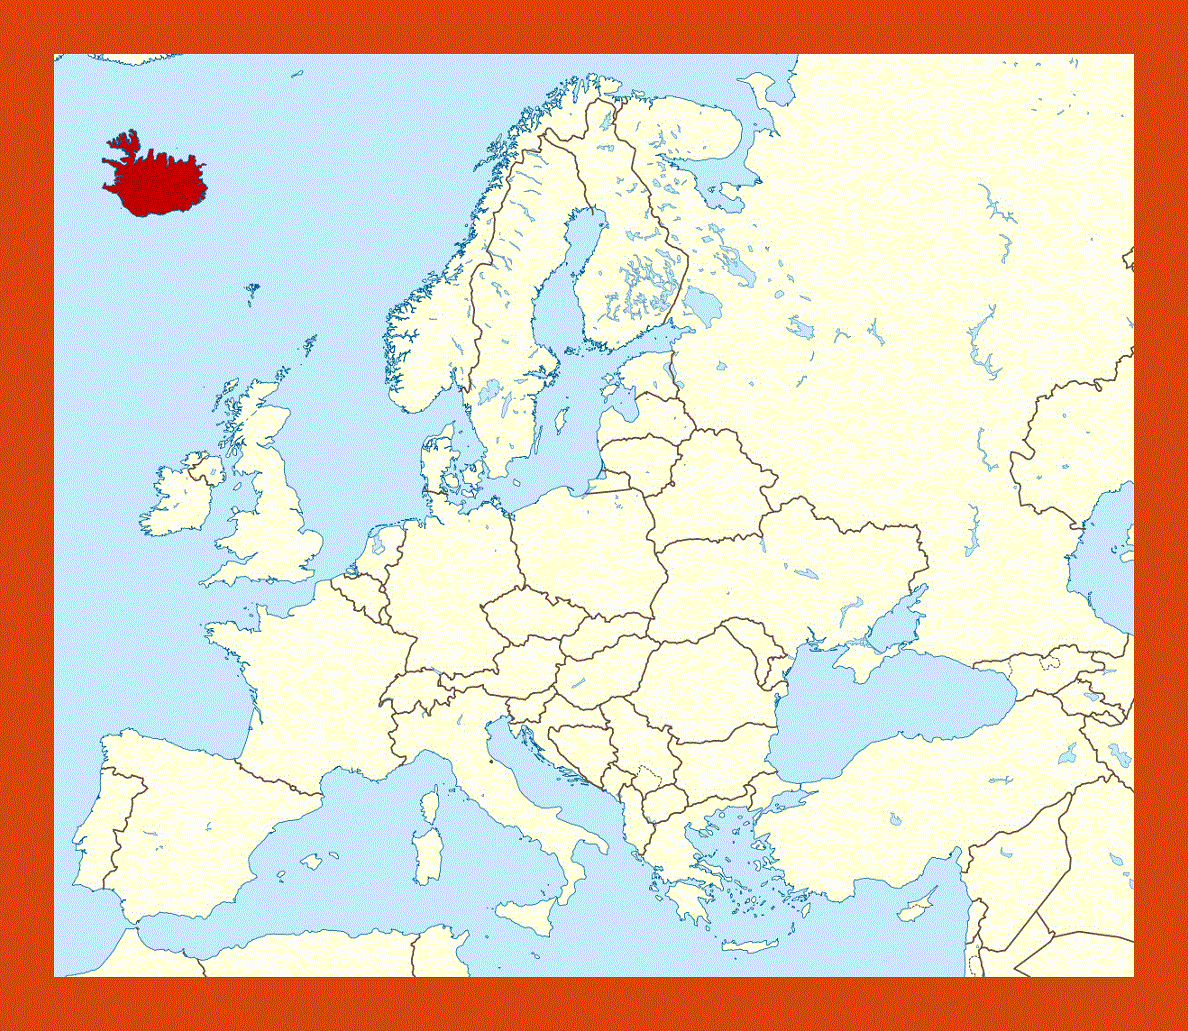 Location map of Iceland in Europe